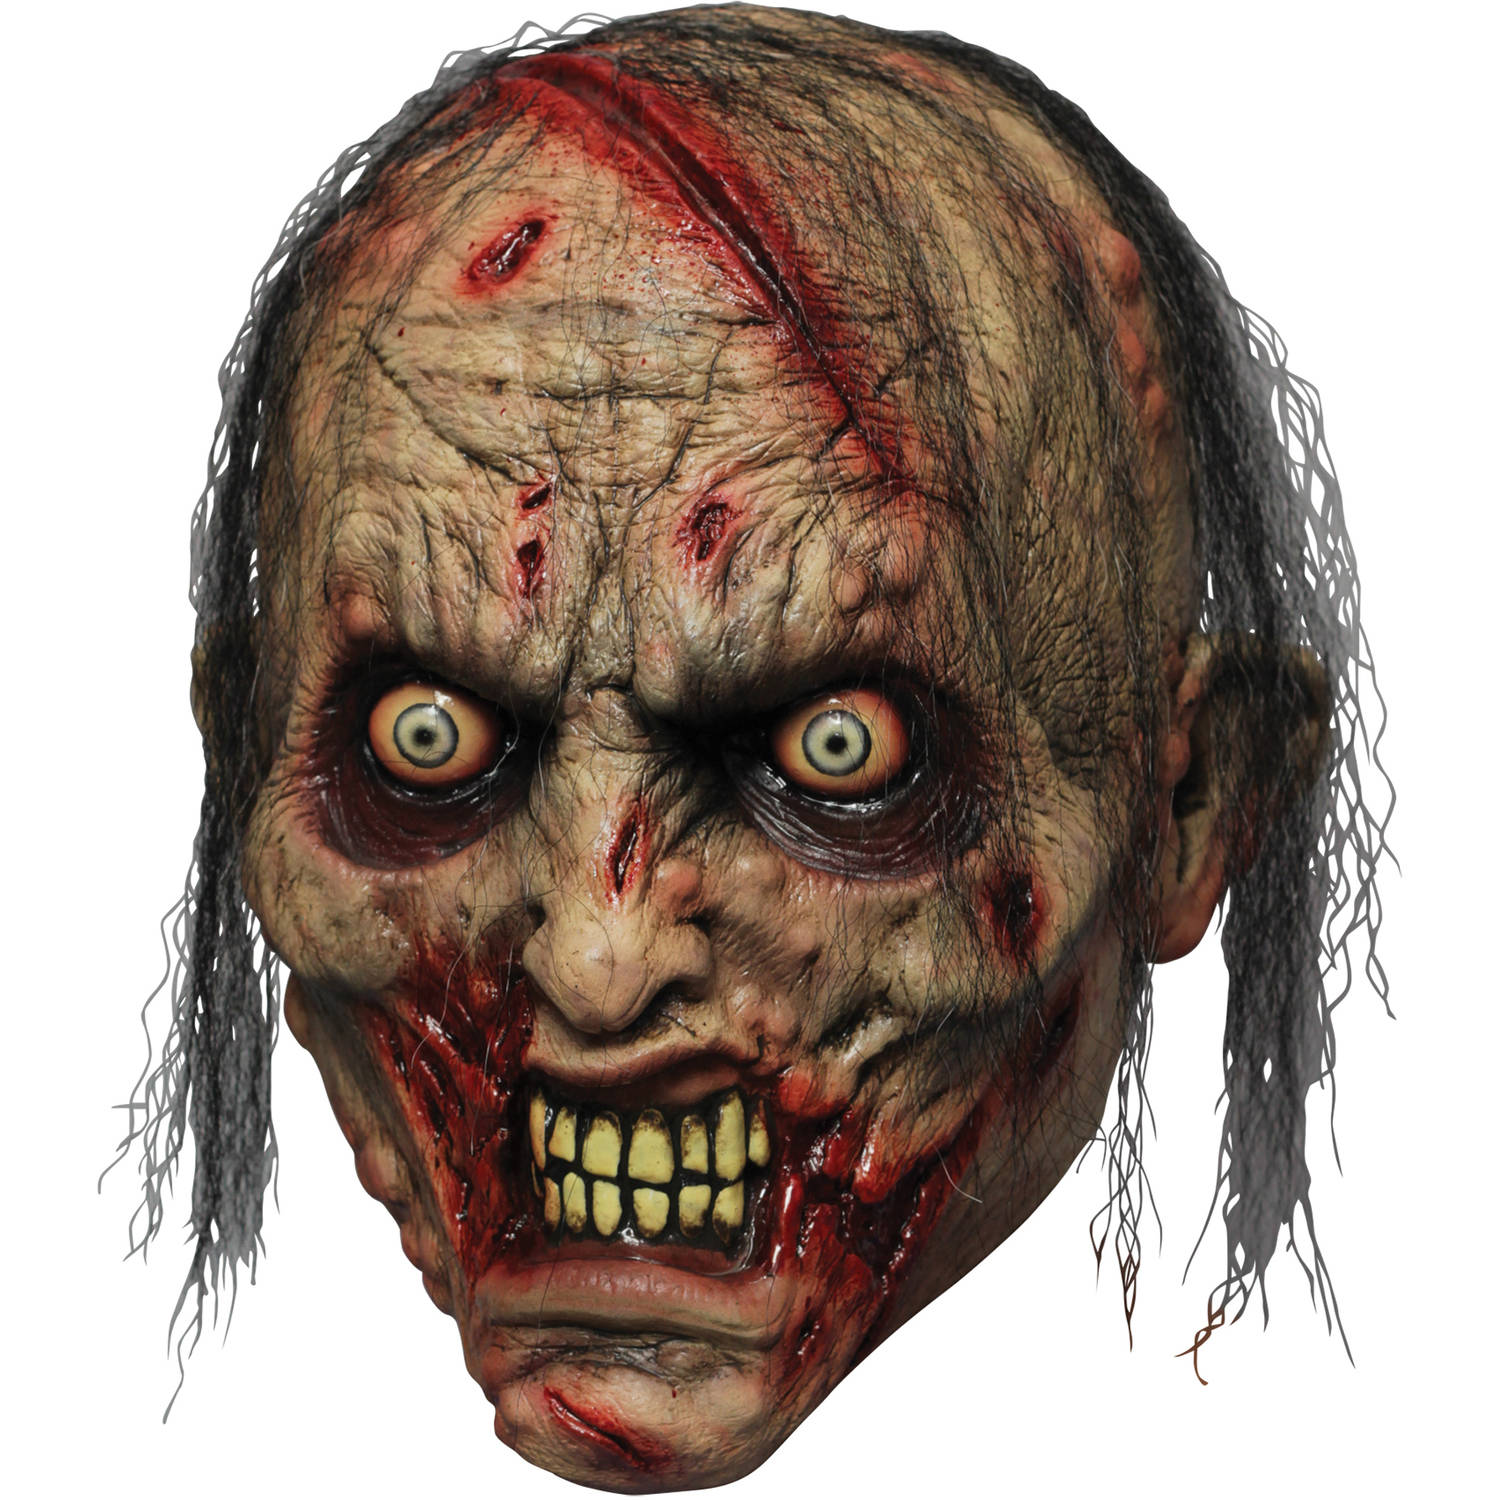 Biter Latex Mask Adult Halloween Accessory - image 1 of 1